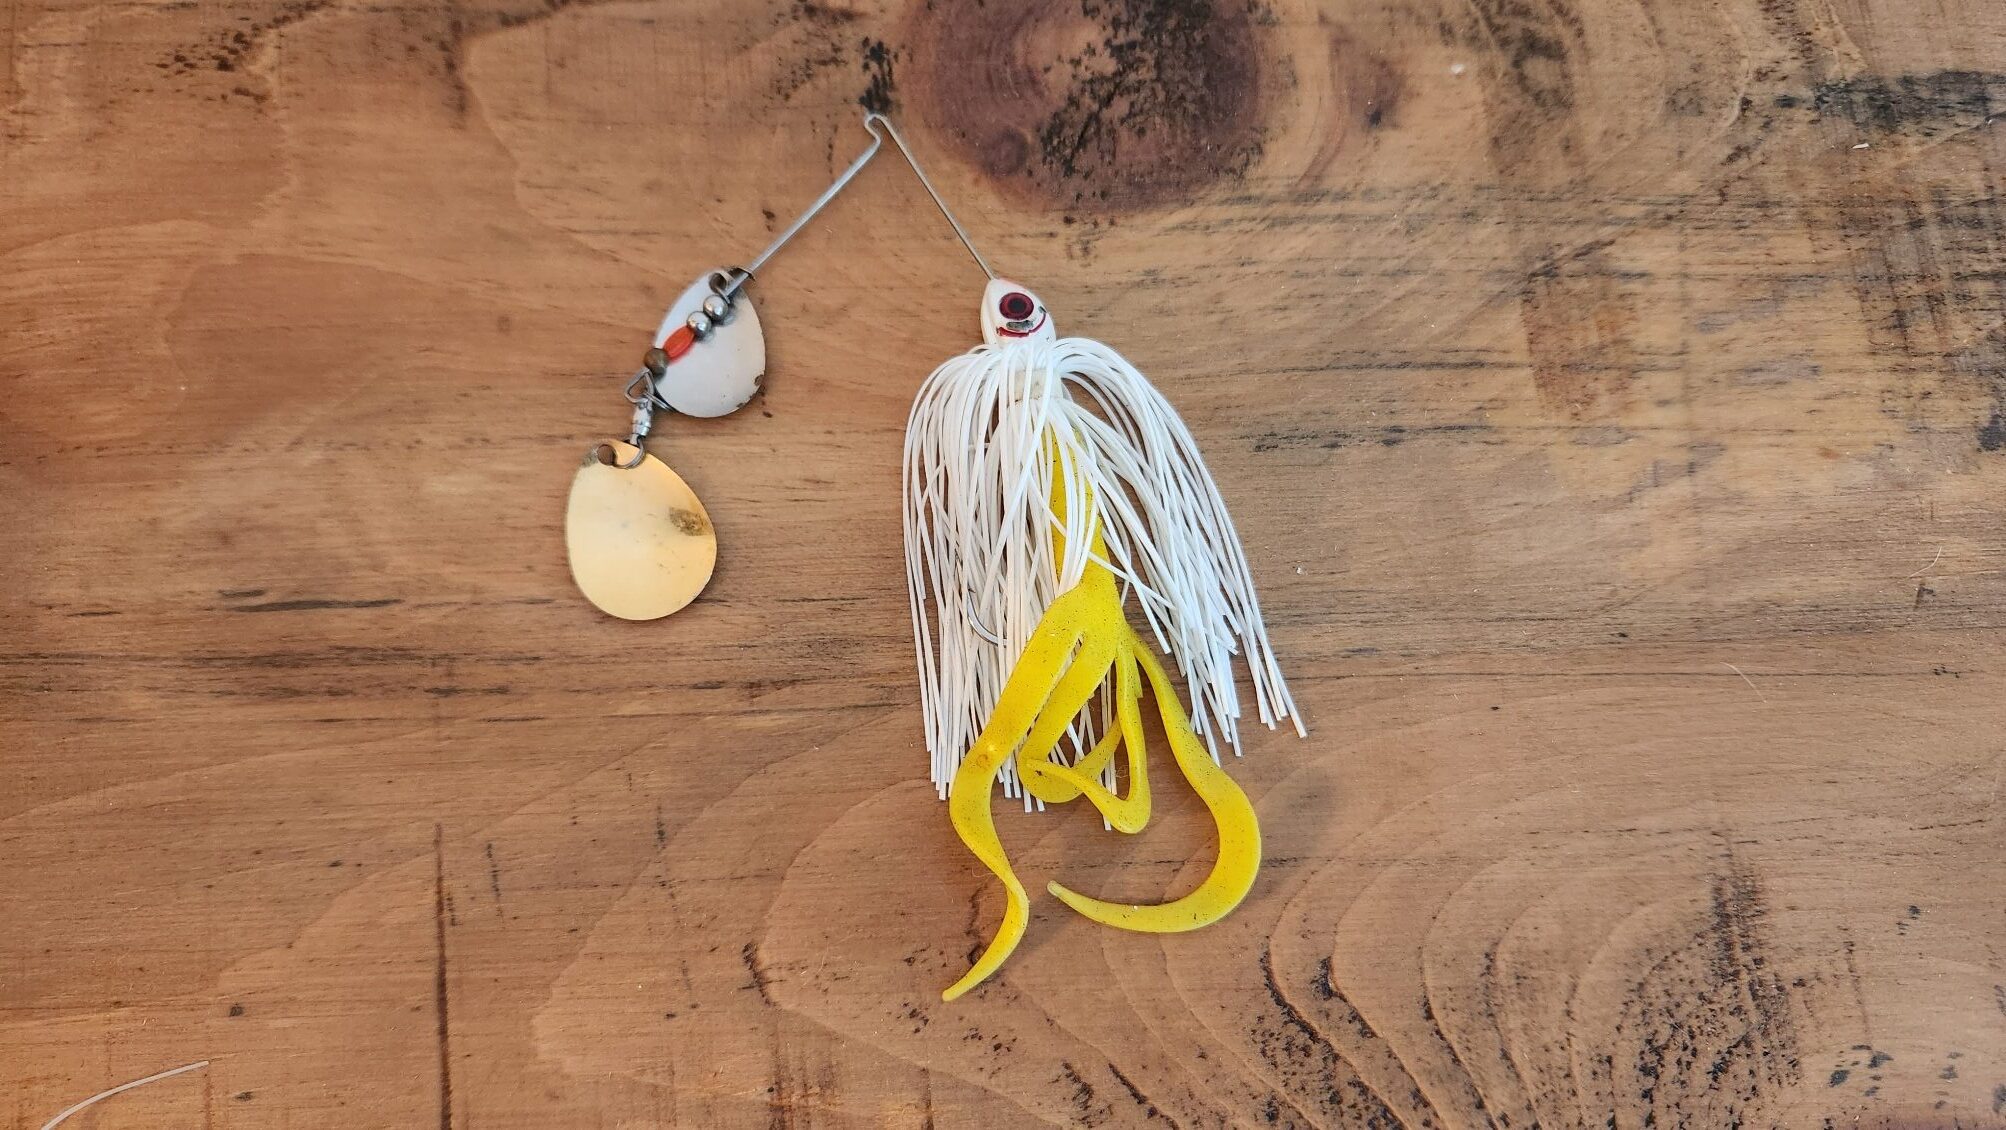 Spinnerbait lure with colorado spoon. White silicone skirt. Yellow four-tail worm leader.